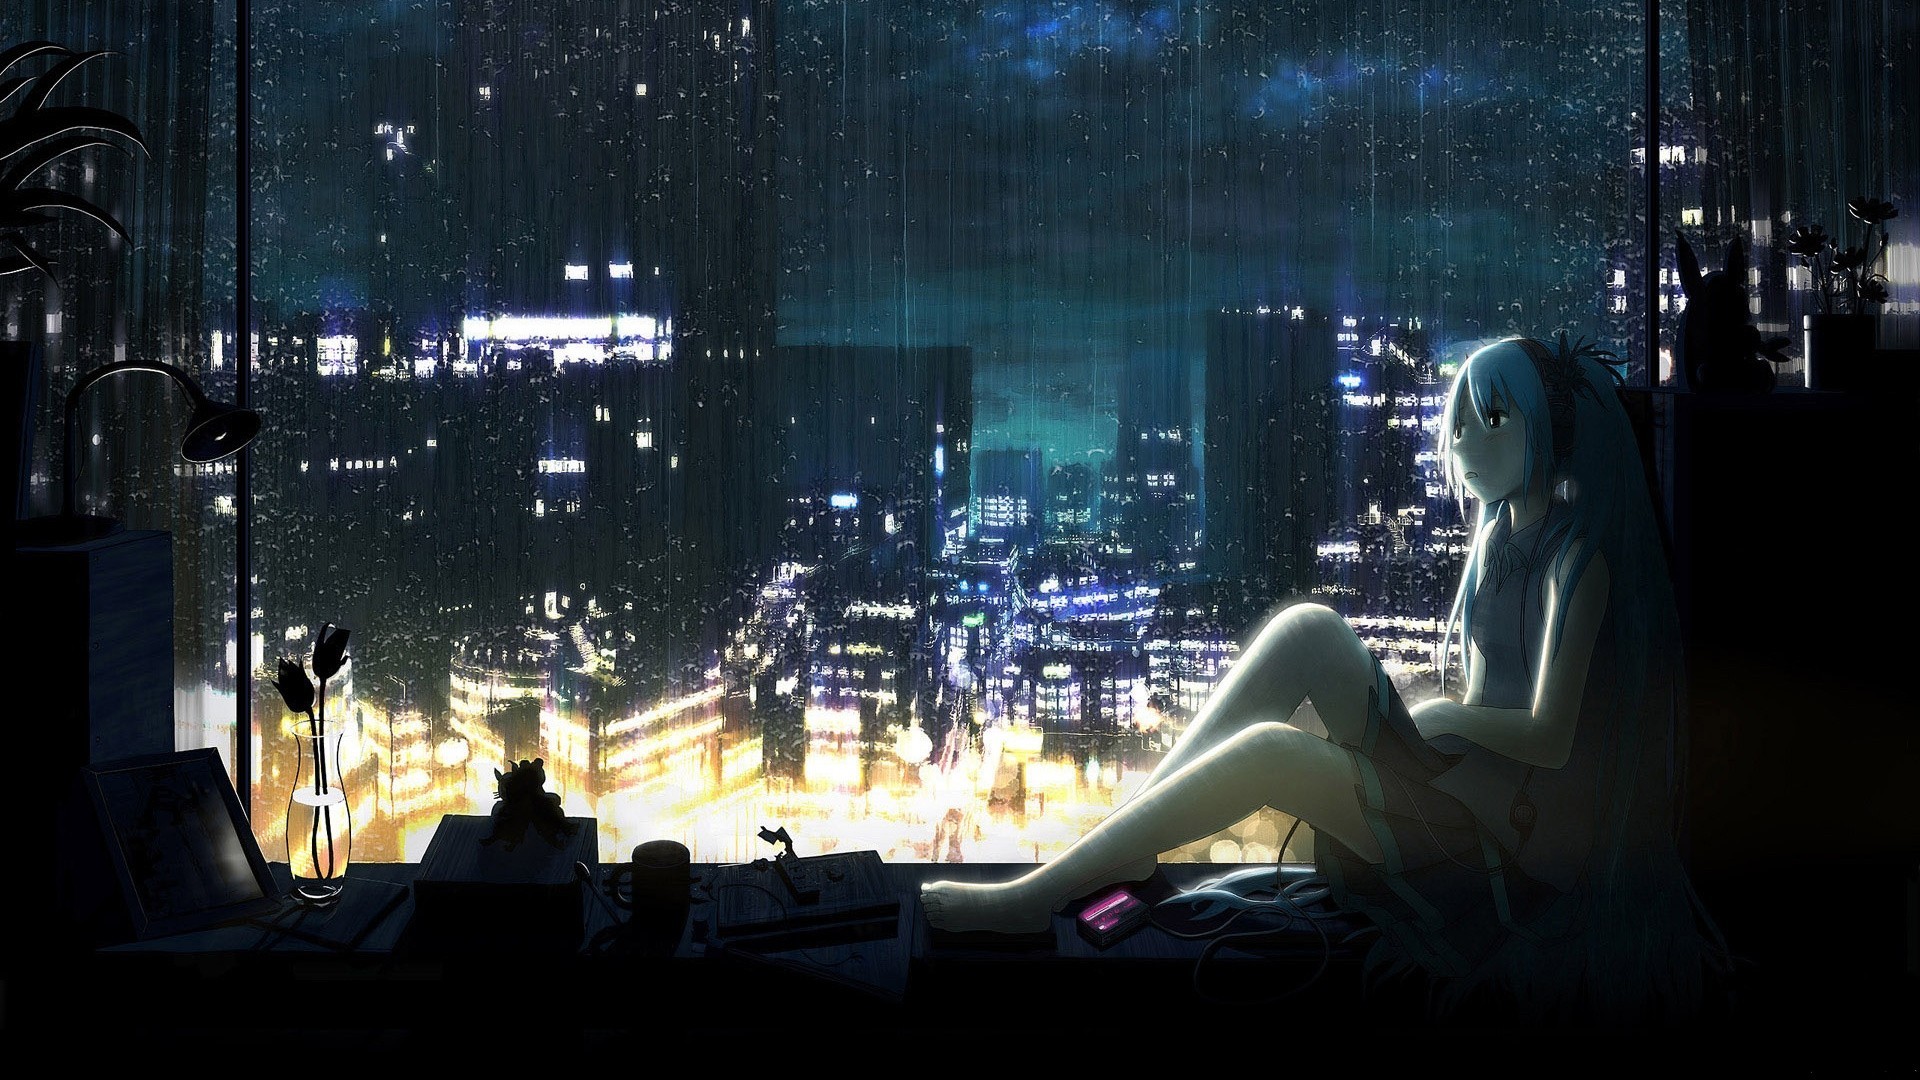 1920x1080 Anime Girls Barefoot Books Cityscapes Clouds Cups Dark Flowers Hatsune Miku  Headphones Lamps Lights Long Hair Mp3 Player Night Rain Skyscapes Vase  Vocaloid ...